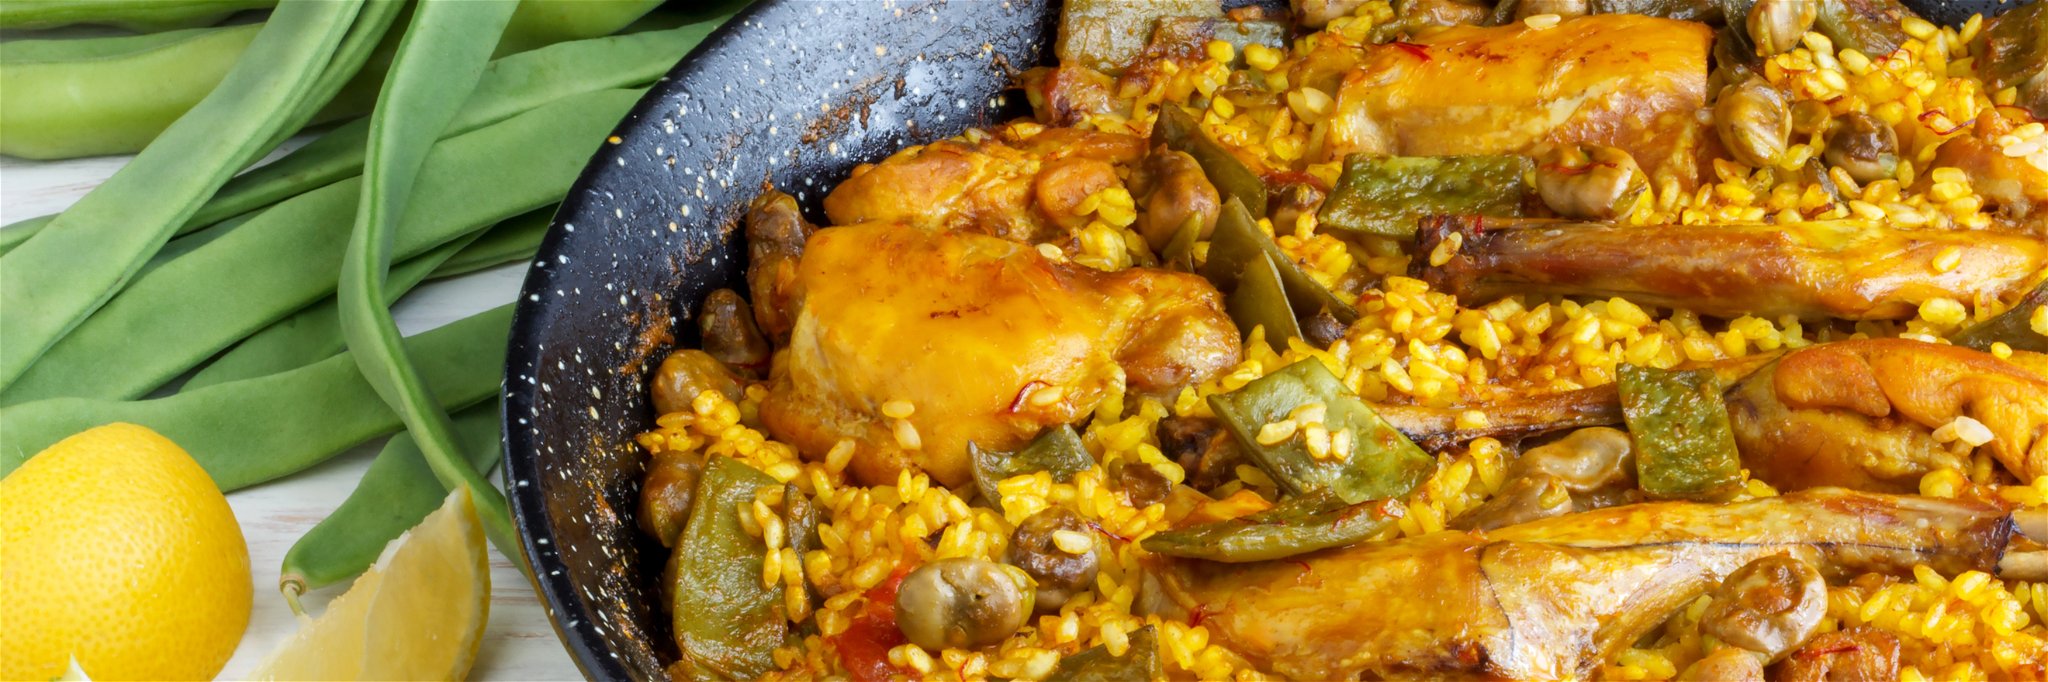 World Paella Day is on 20 September.